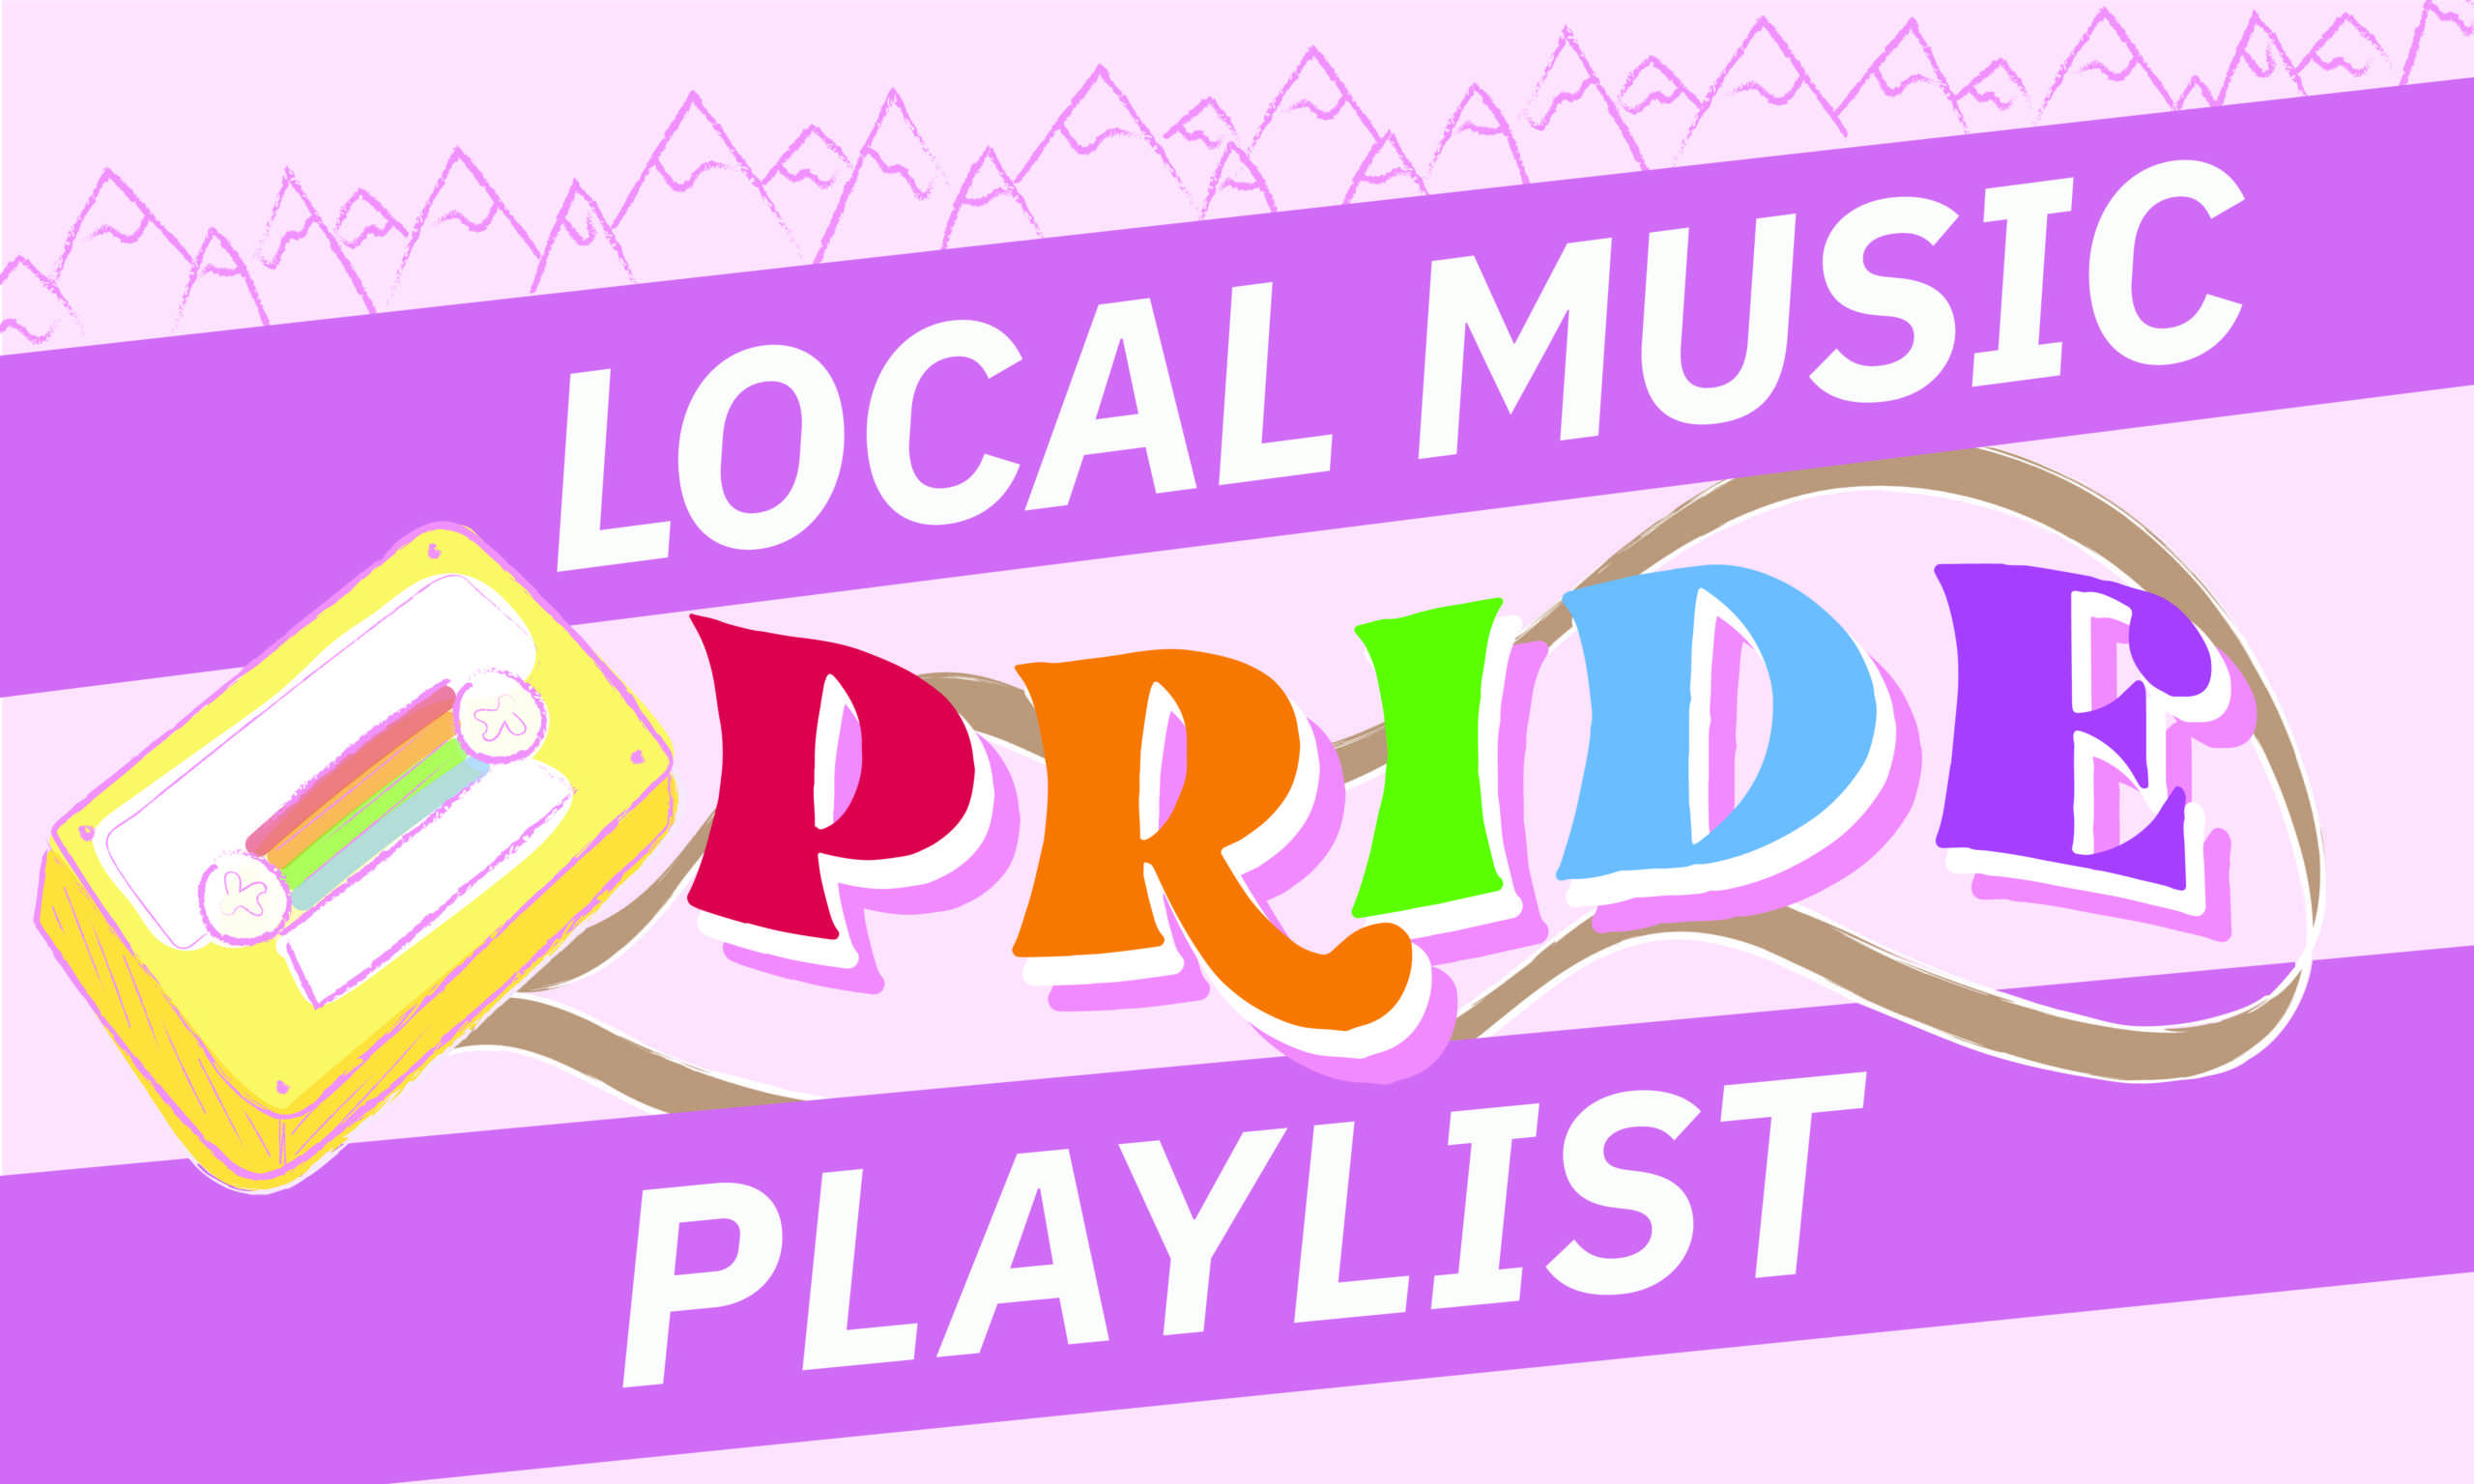 A graphic designed for a listicle of pride songs by local artists in Colorado called 'Local Music Pride Playlist.'